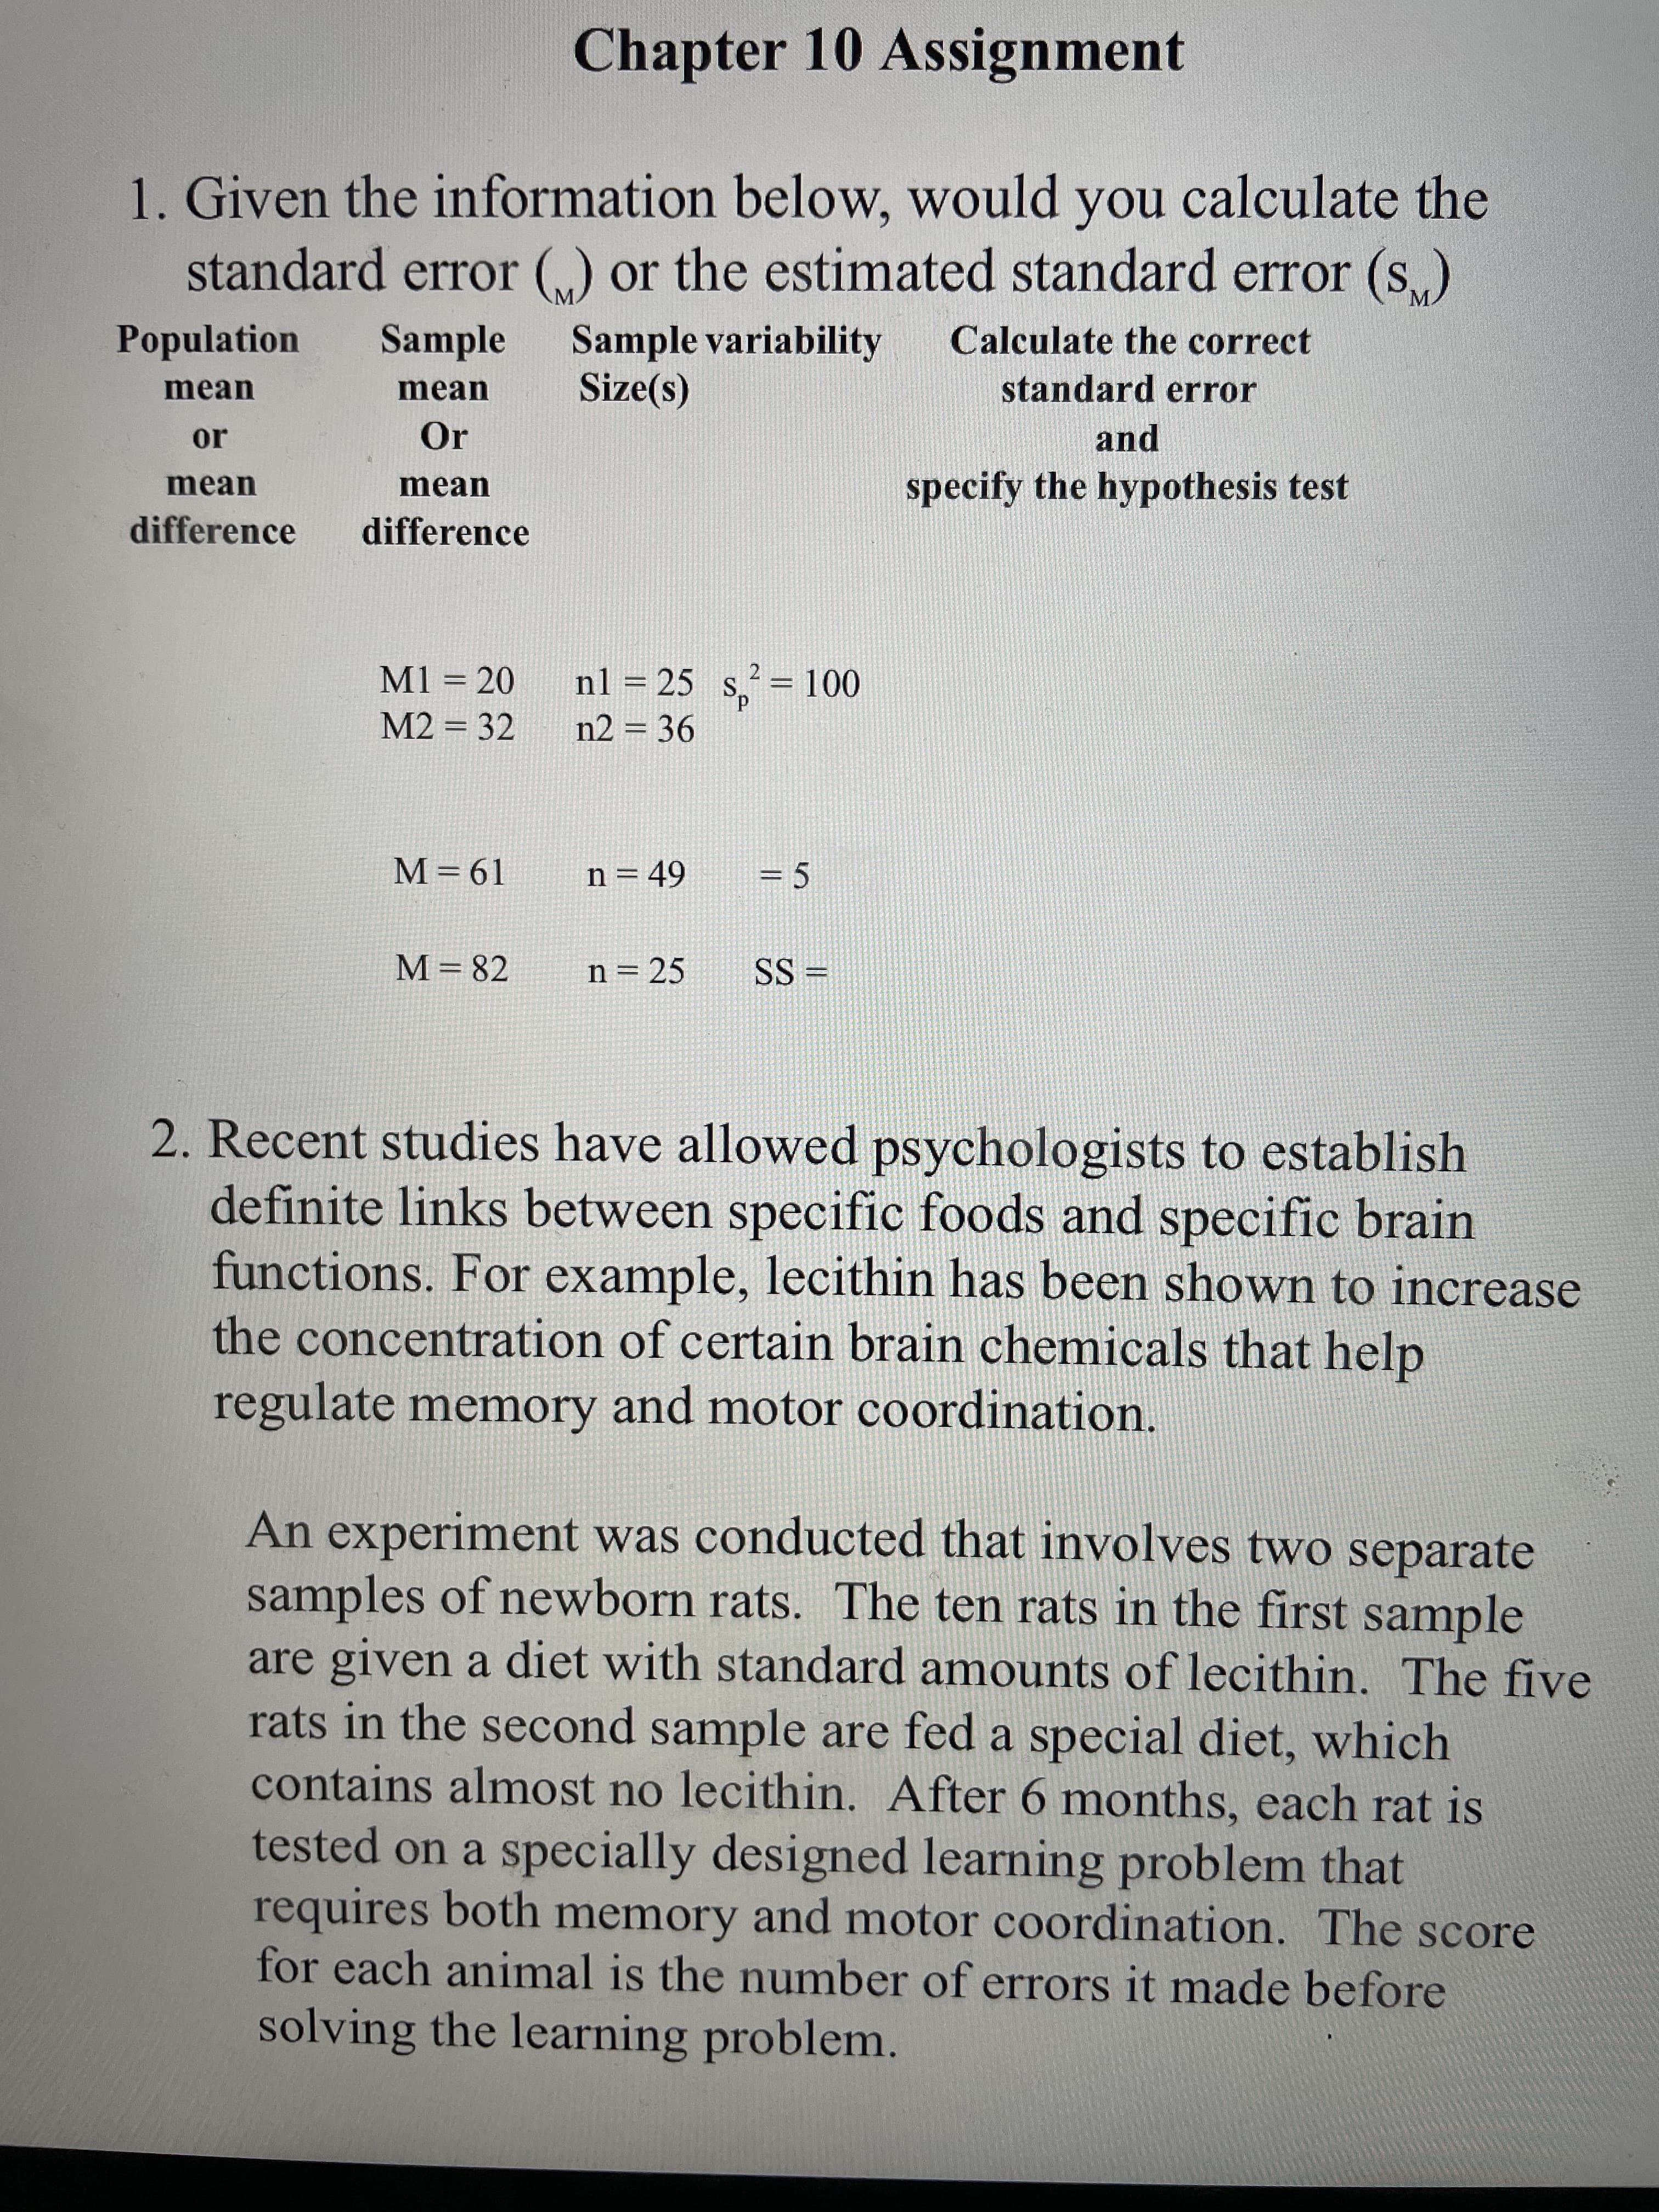 ||
Chapter 10 Assignment
1. Given the information below, would you calculate the
standard error („) or the estimated standard error (s)
M.
Population
Sample
Sample variability
Calculate the correct
standard error
mean
mean
Or
and
or
mean
specify the hypothesis test
mean
difference
difference
M1 = 20
nl = 25 s,
2 = 100
%3D
%3D
M2 = 32
n2 = 36
M=61
n = 49
= 5
M= 82
n= 25
= SS
2. Recent studies have allowed psychologists to establish
definite links between specific foods and specific brain
functions. For example, lecithin has been shown to increase
the concentration of certain brain chemicals that help
regulate memory and motor coordination.
An experiment was conducted that involves two separate
samples of newborn rats. The ten rats in the first sample
are given a diet with standard amounts of lecithin. The five
rats in the second sample are fed a special diet, which
contains almost no lecithin. After 6 months, each rat is
tested on a specially designed learning problem that
requires both memory and motor coordination. The score
for each animal is the number of errors it made before
solving the learning problem.
